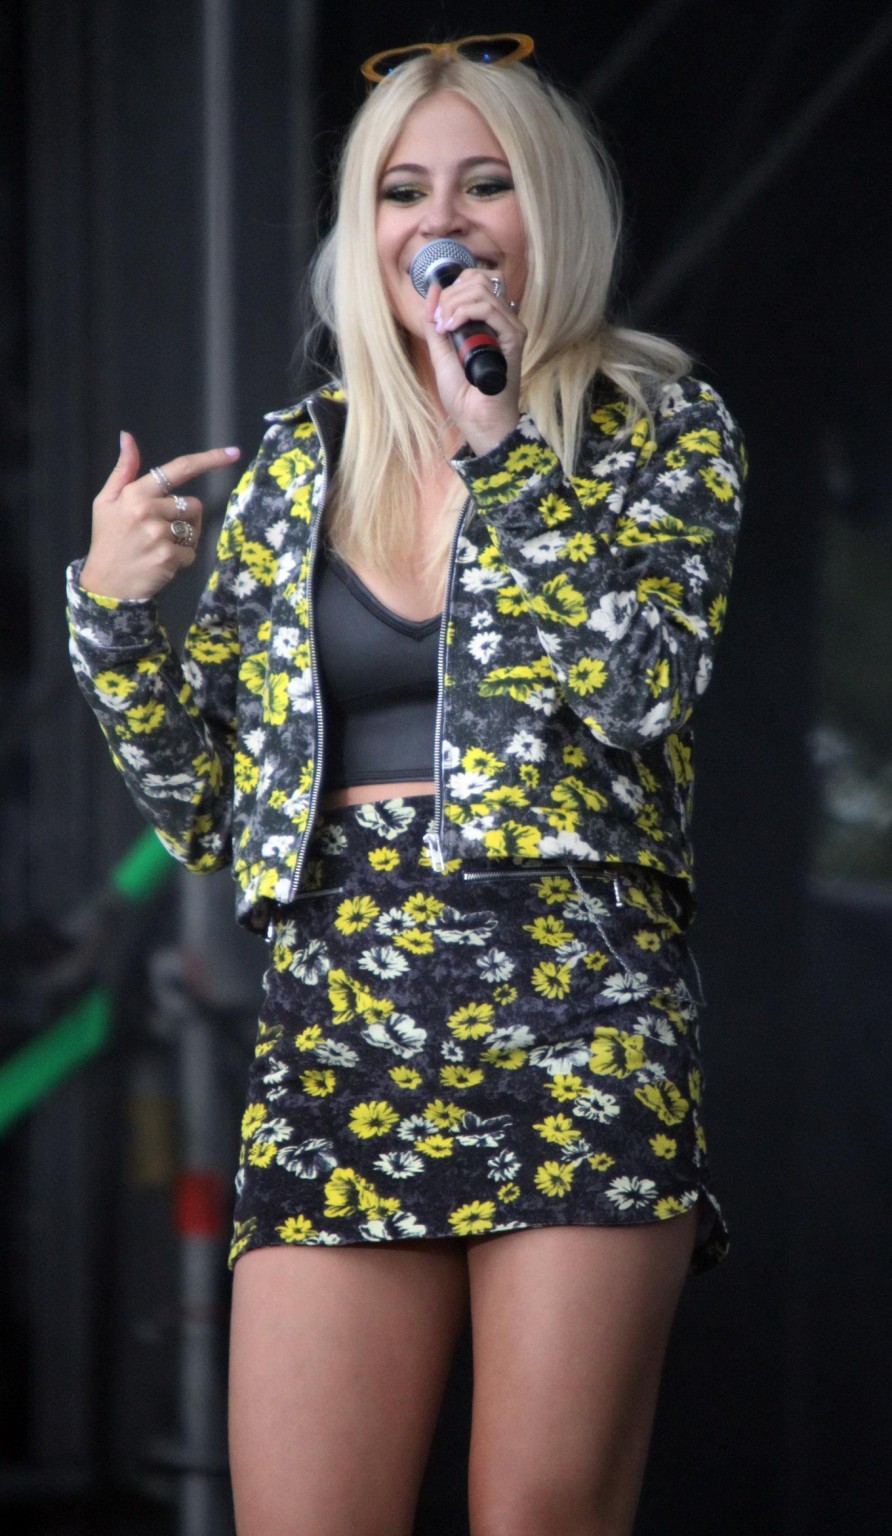 Pixie lott upskirt sul palco a totale accesso live 2014 in cheshire
 #75188544